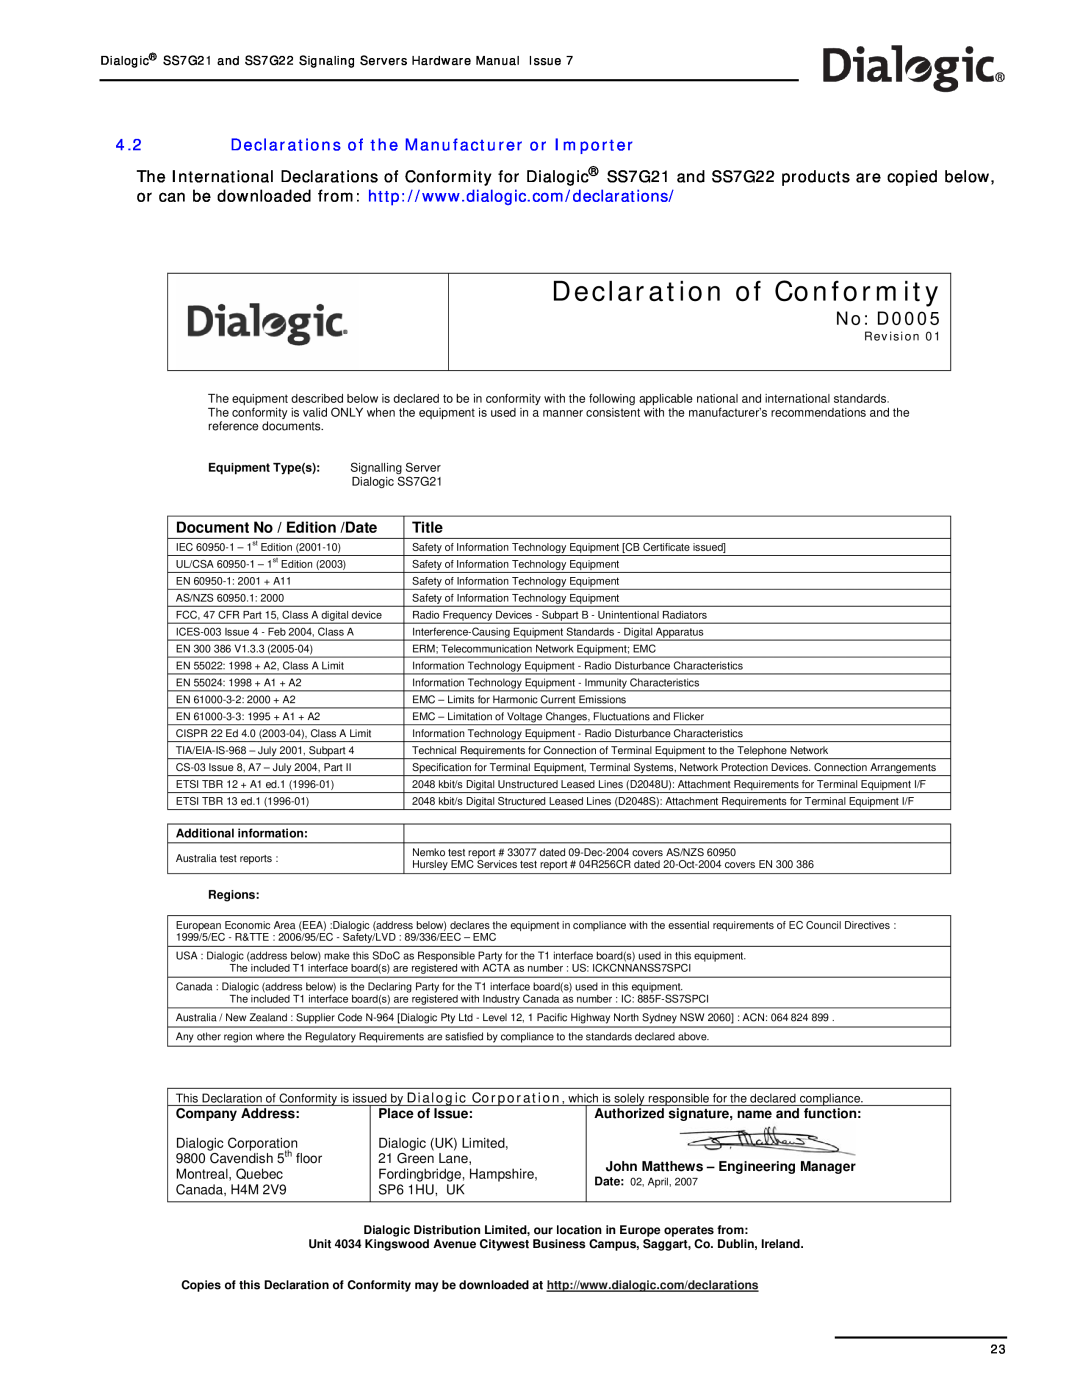 Dialogic SS7G22 Declaration of Conformity, No D0005, Declarations of the Manufacturer or Importer, Title, Company Address 